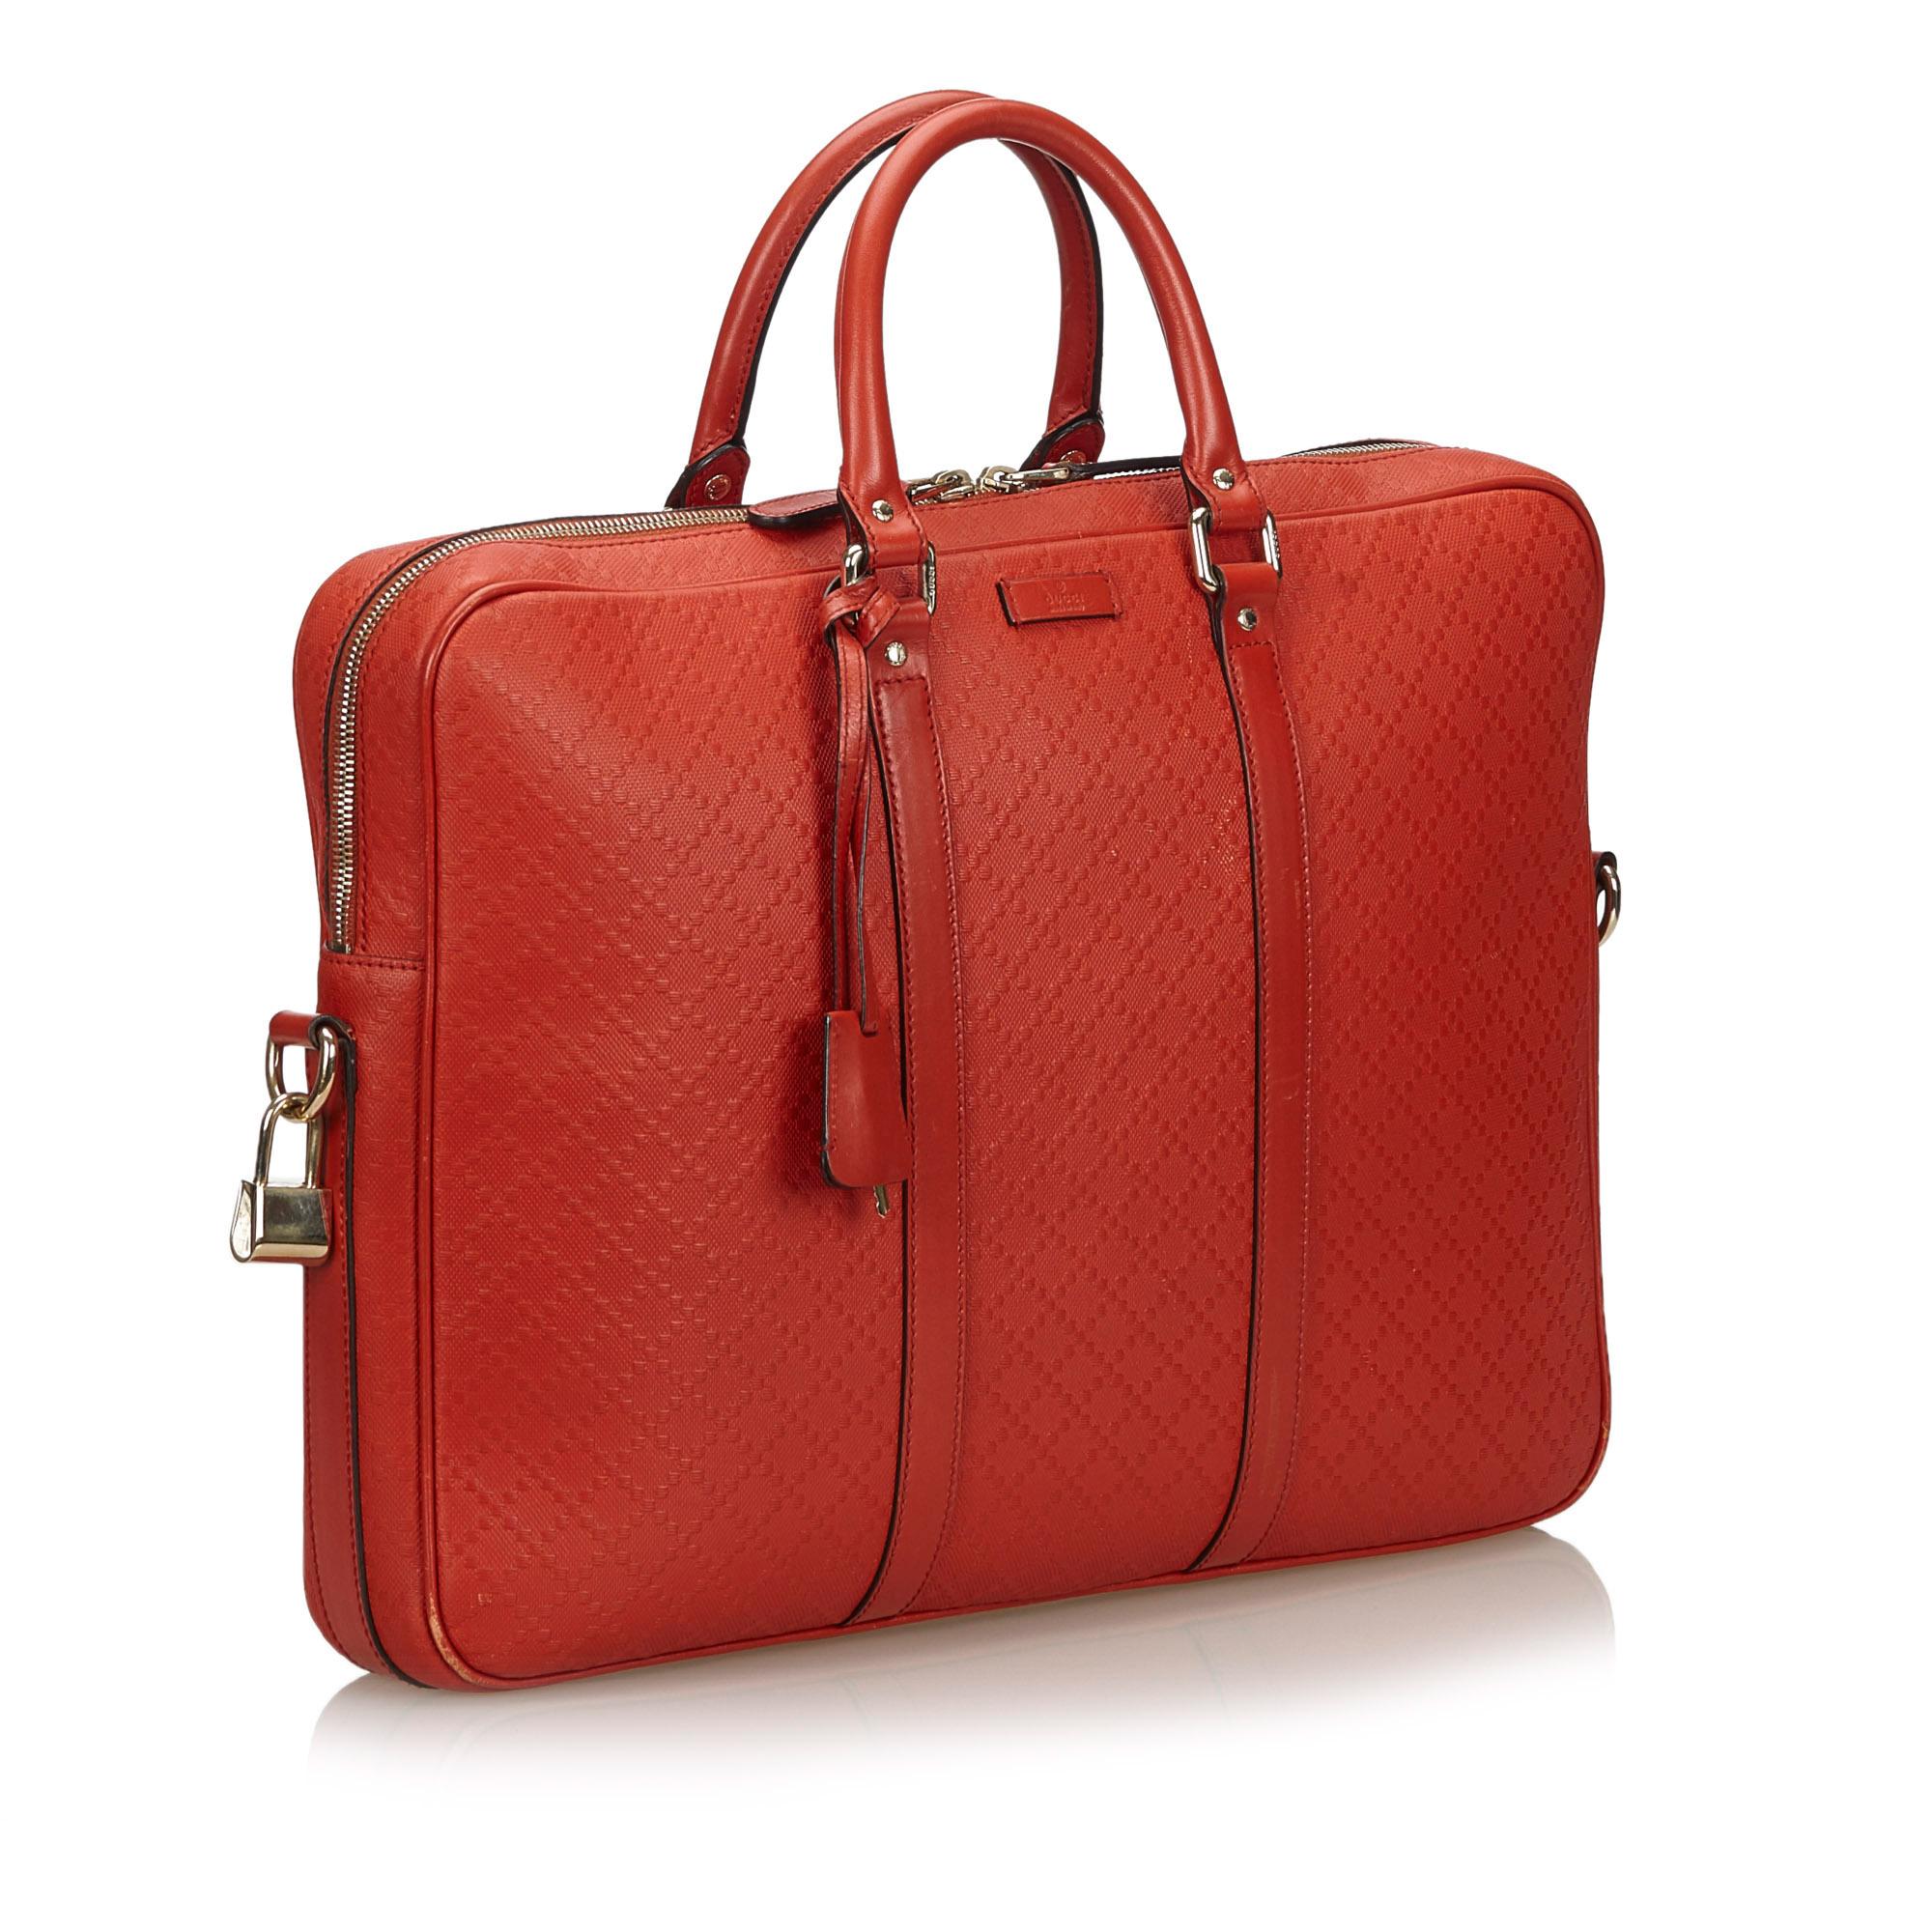 This briefcase features a leather body, rolled leather handles, a flat leather strap, a top zip closure, and interior zip and slip pockets. It carries as B+ condition rating.

Inclusions: 
Padlock
Key

Dimensions:
Length: 31.00 cm
Width: 41.00